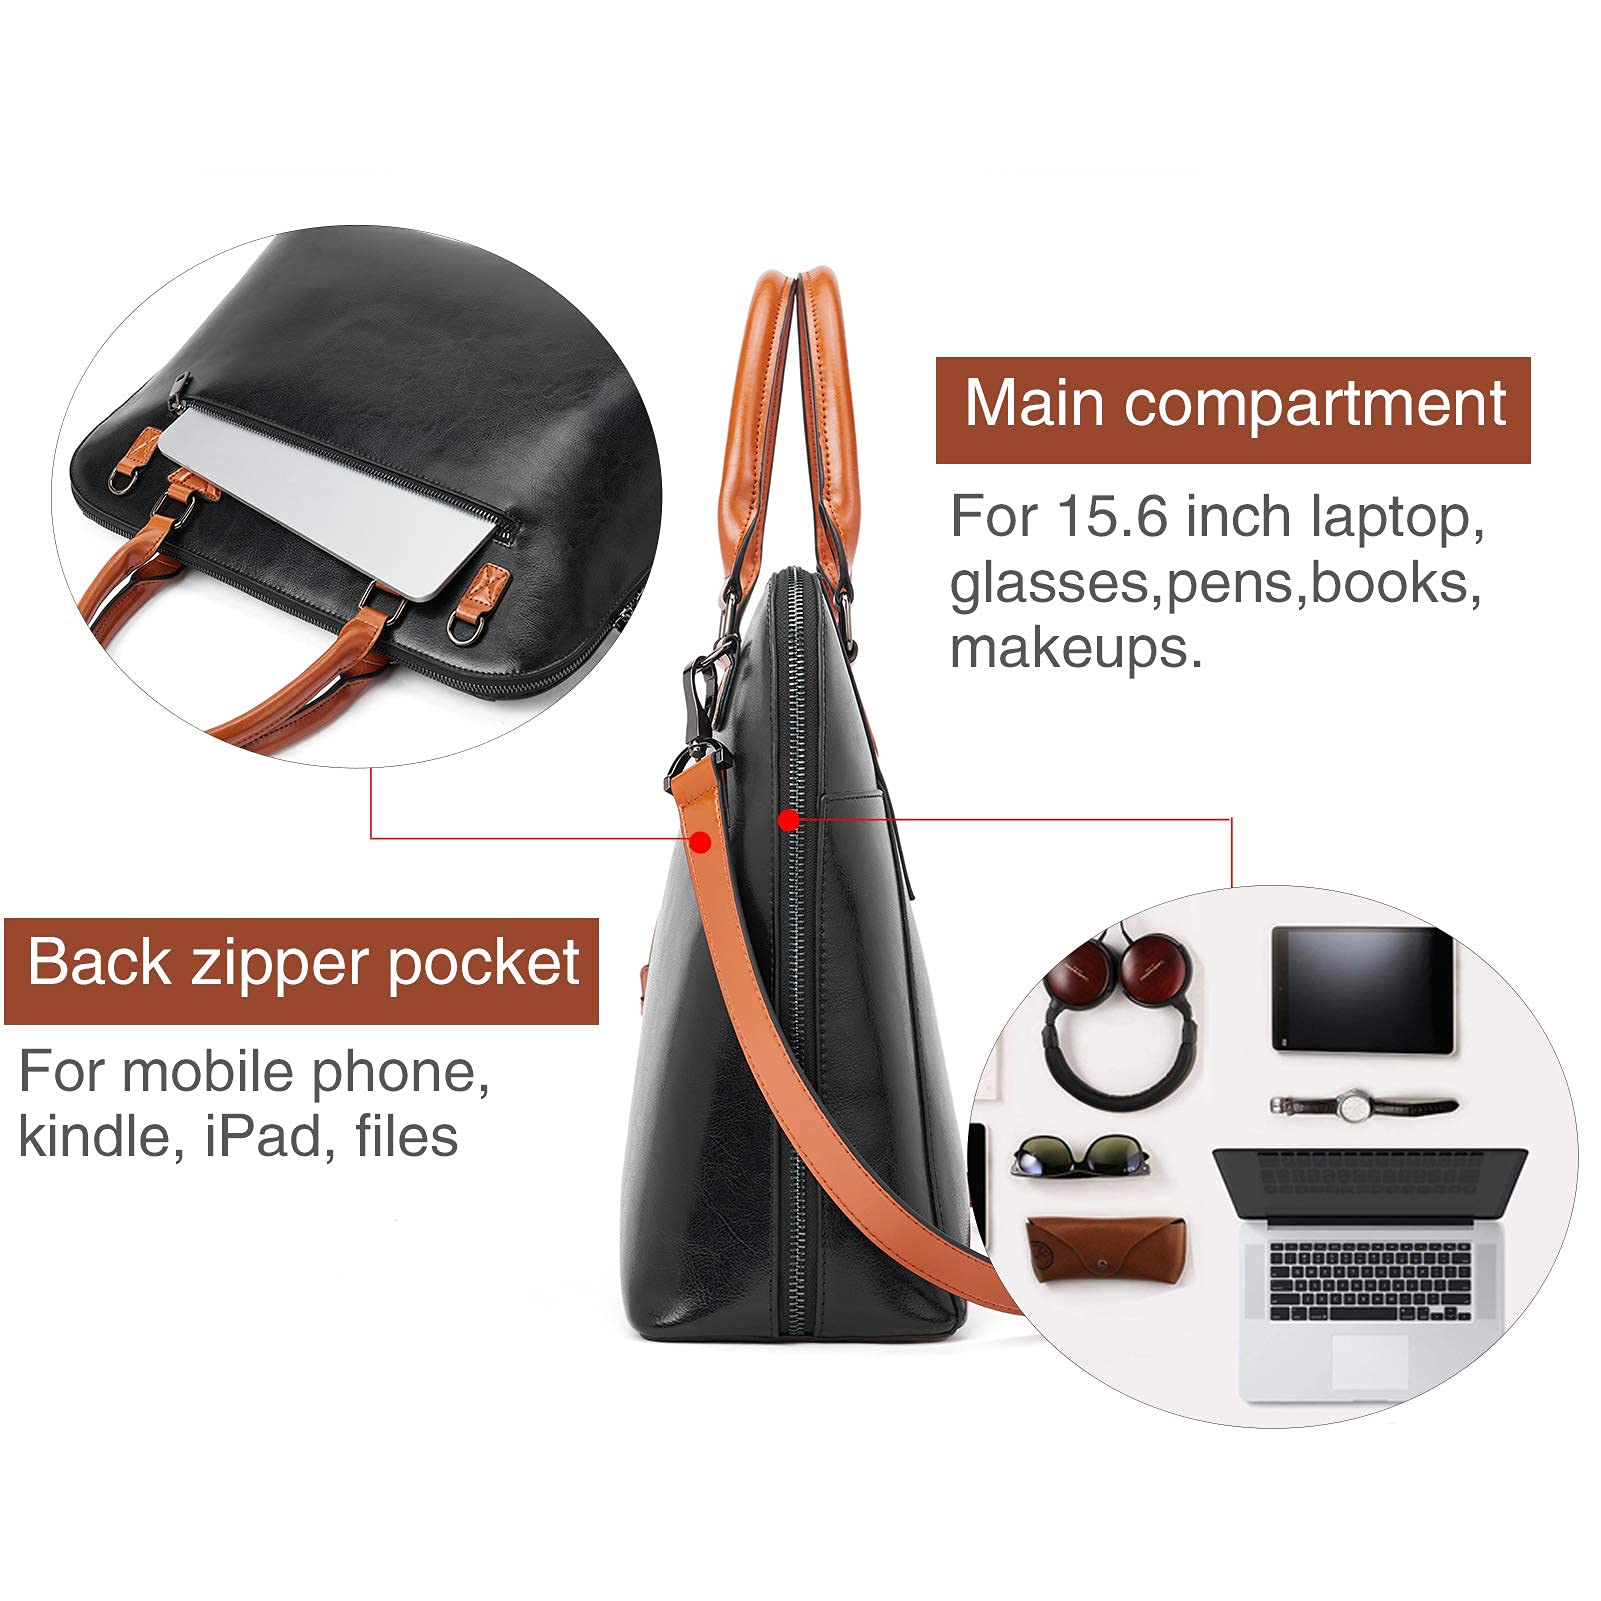 BOSTANTEN Briefcase for Women Leather 15.6 inch Laptop Shoulder Bags Office Work Crossbody Handbags and Womens Leather Wallets RFID Blocking Large Capacity Credit Card Holder Phone Clutch